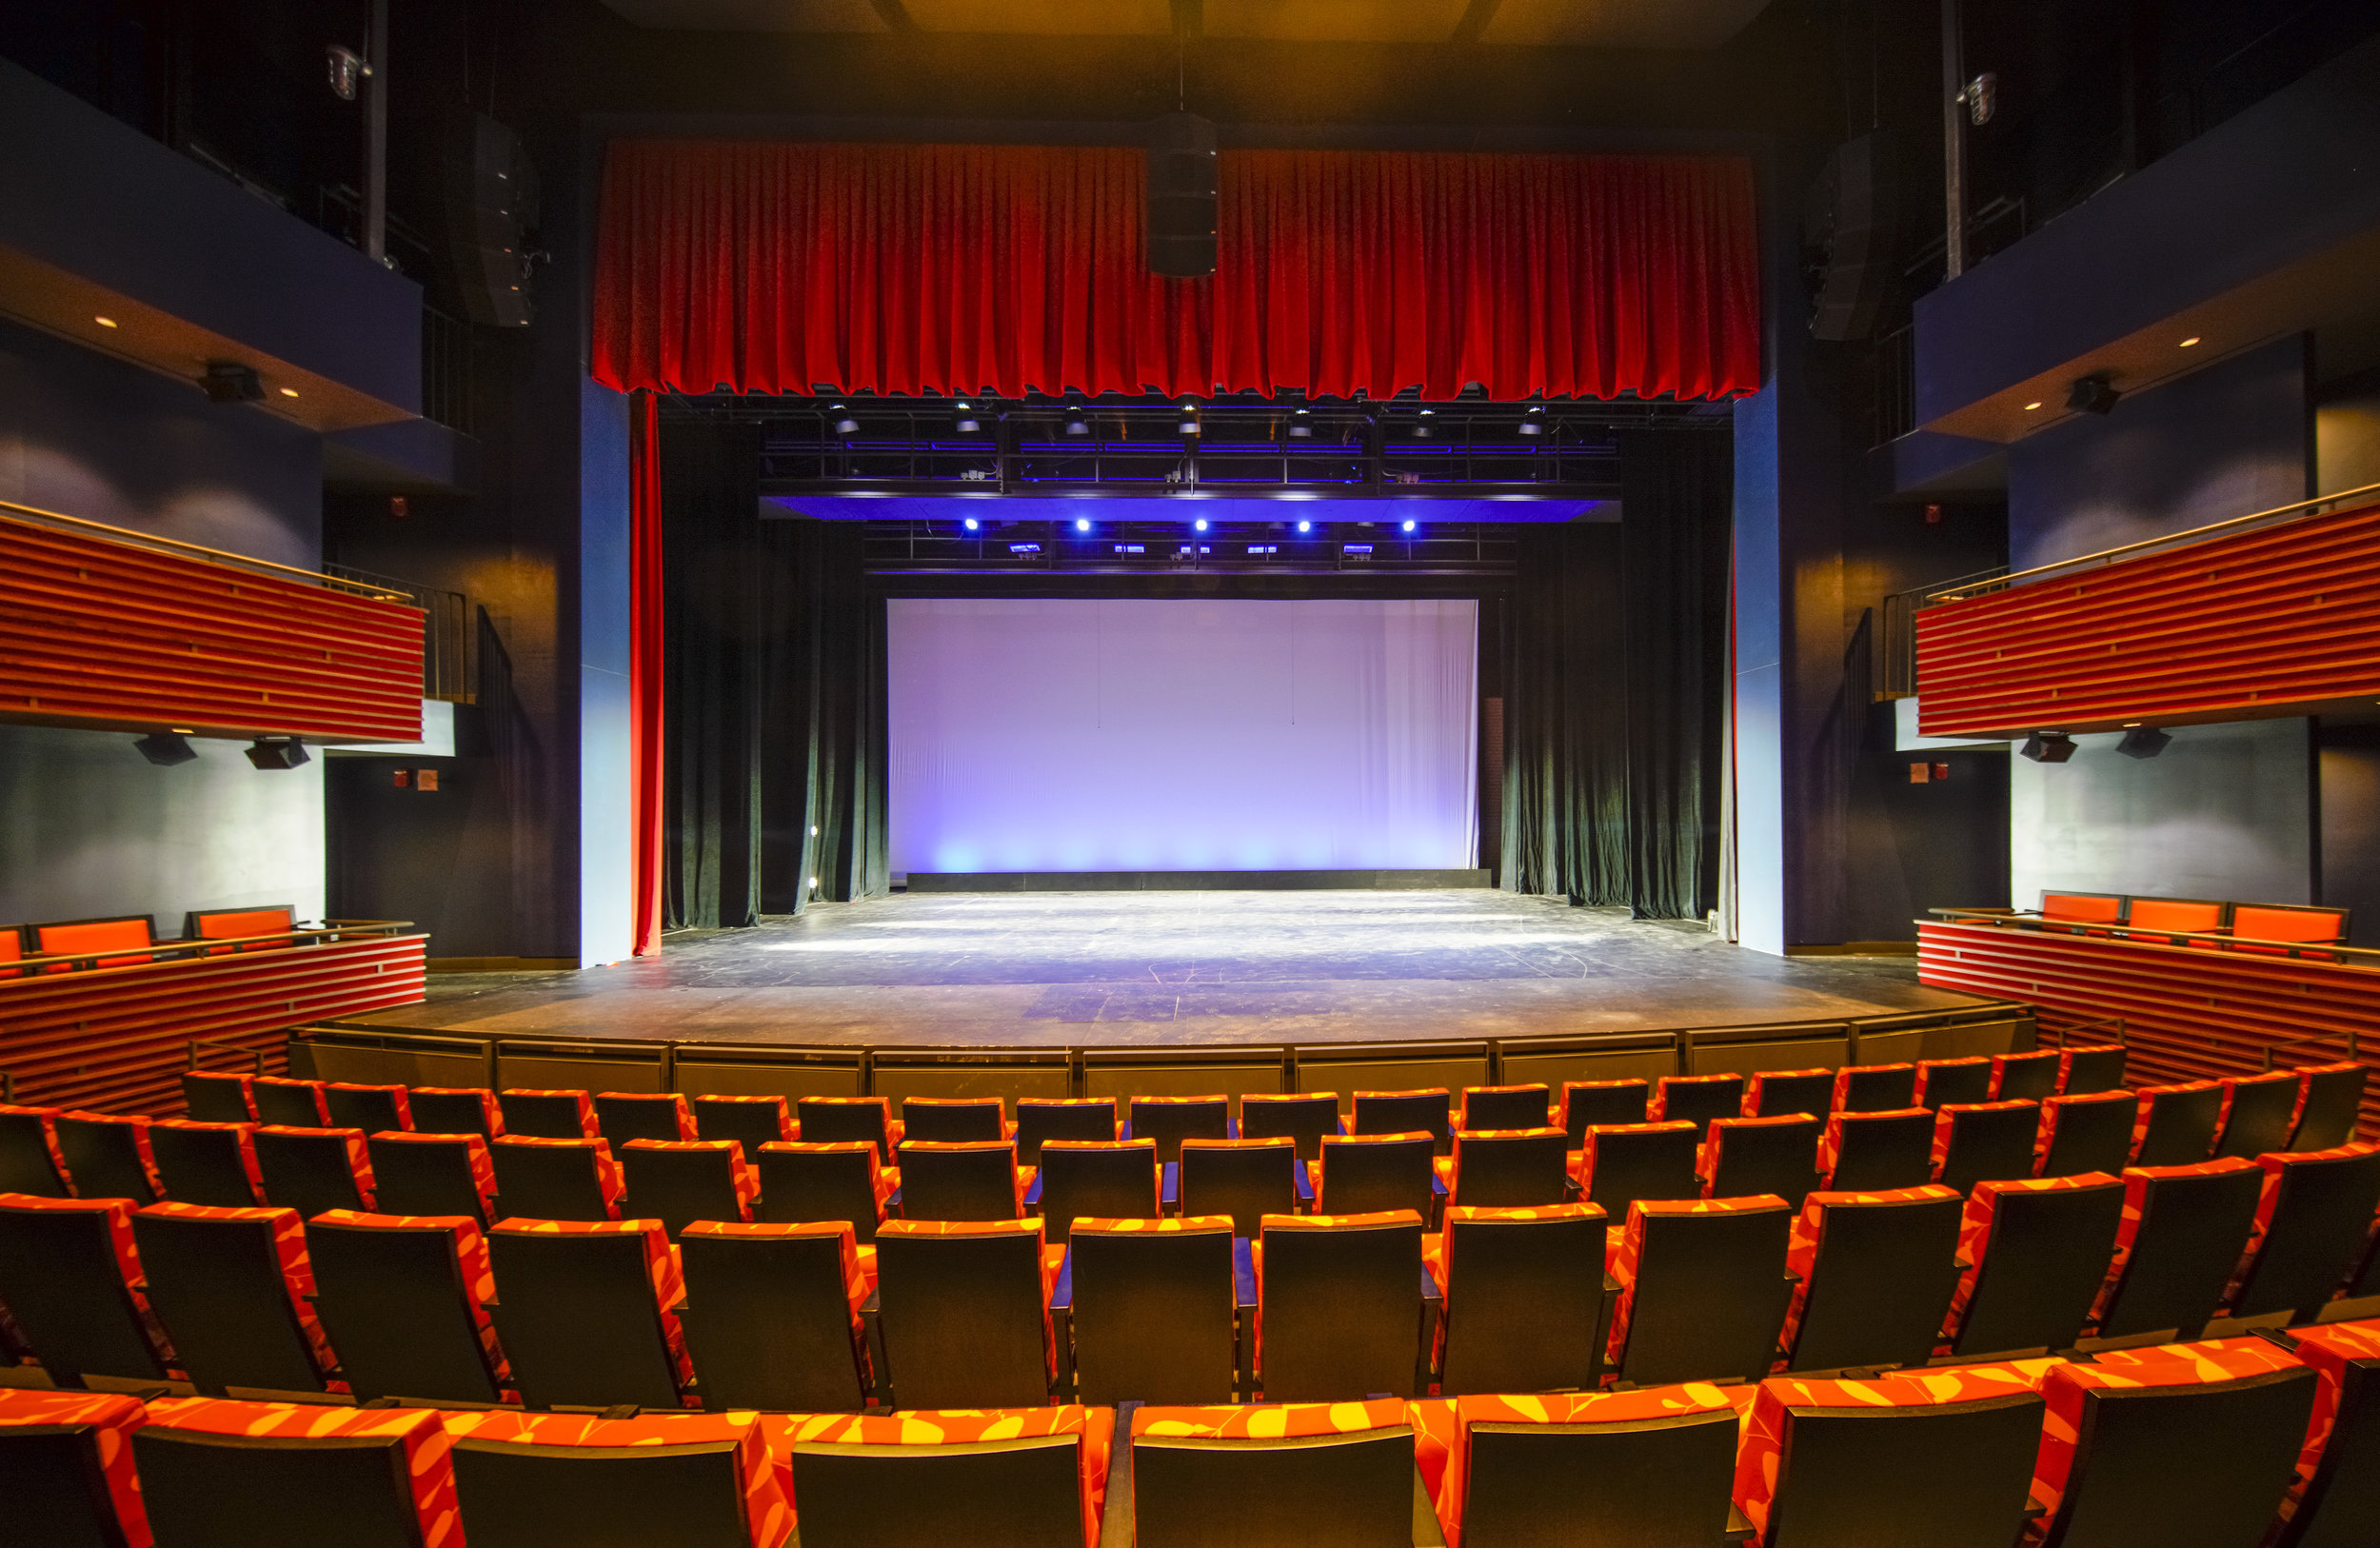 Five Levels, Six Performance Spaces, One State-of-the-Art Theatrical Center